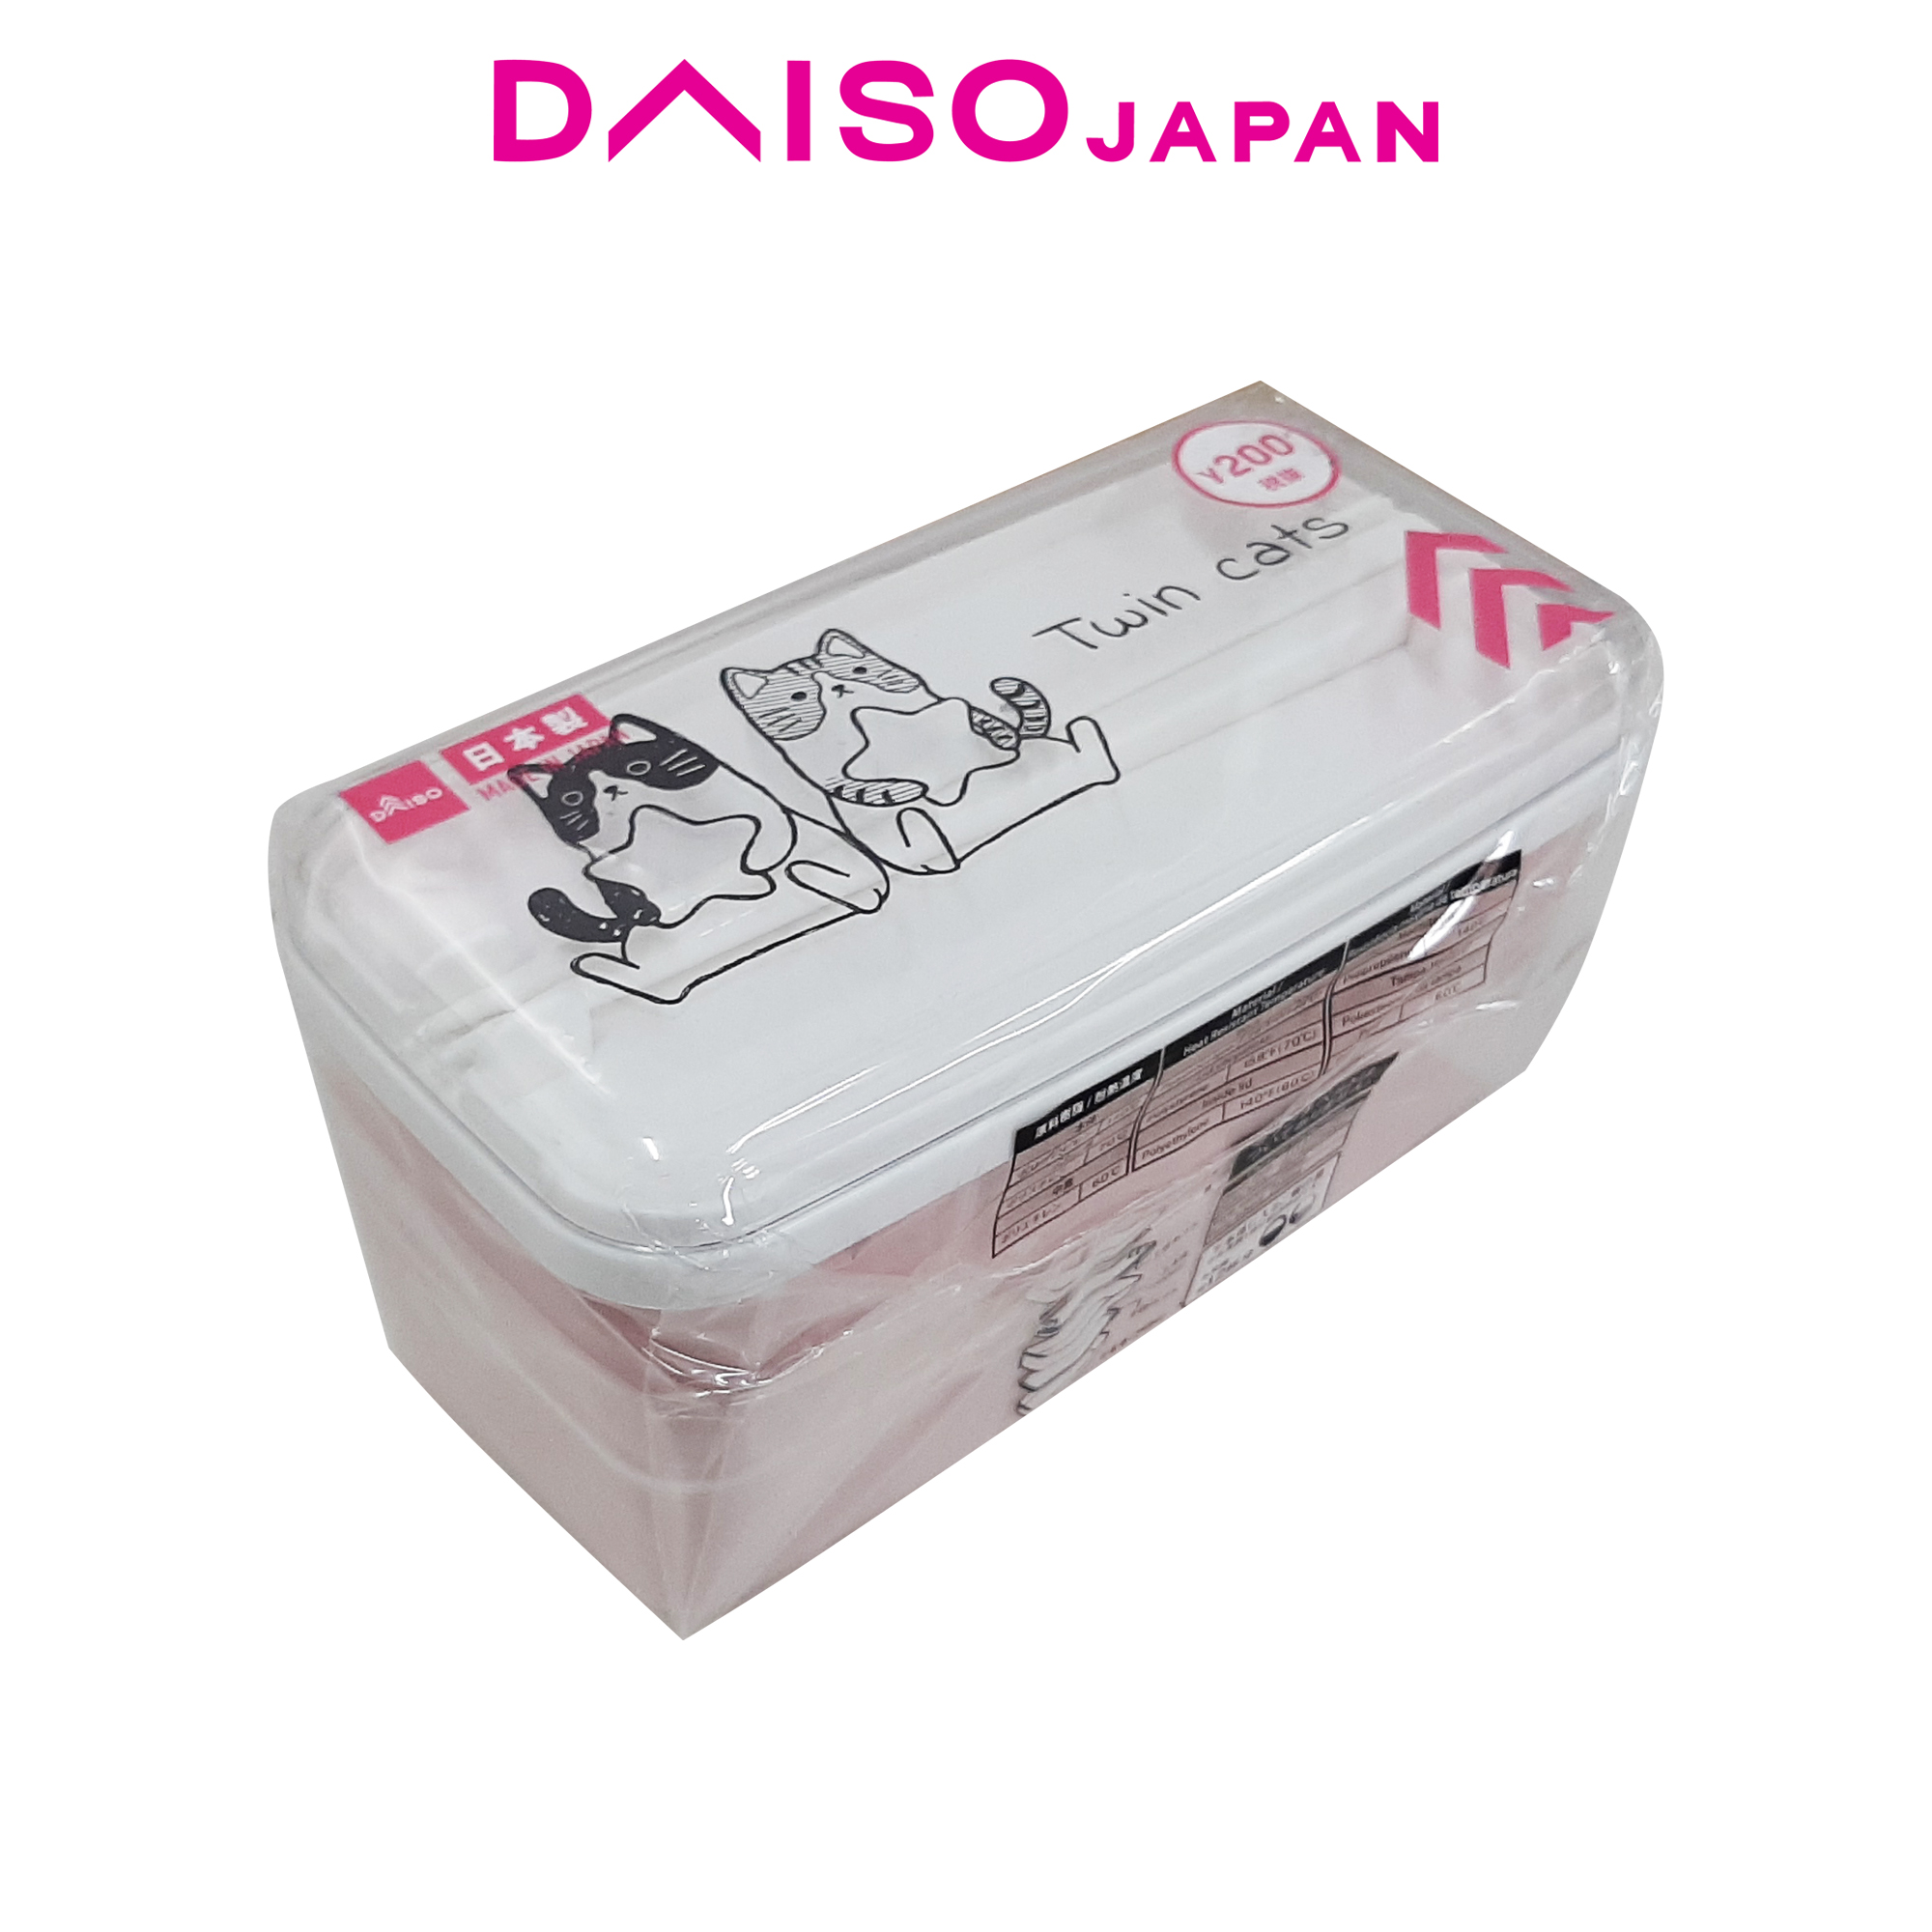 Daiso Japanese Coca Cola Food Lunch Picks 12pcs Flag For Lunch Box Bento 